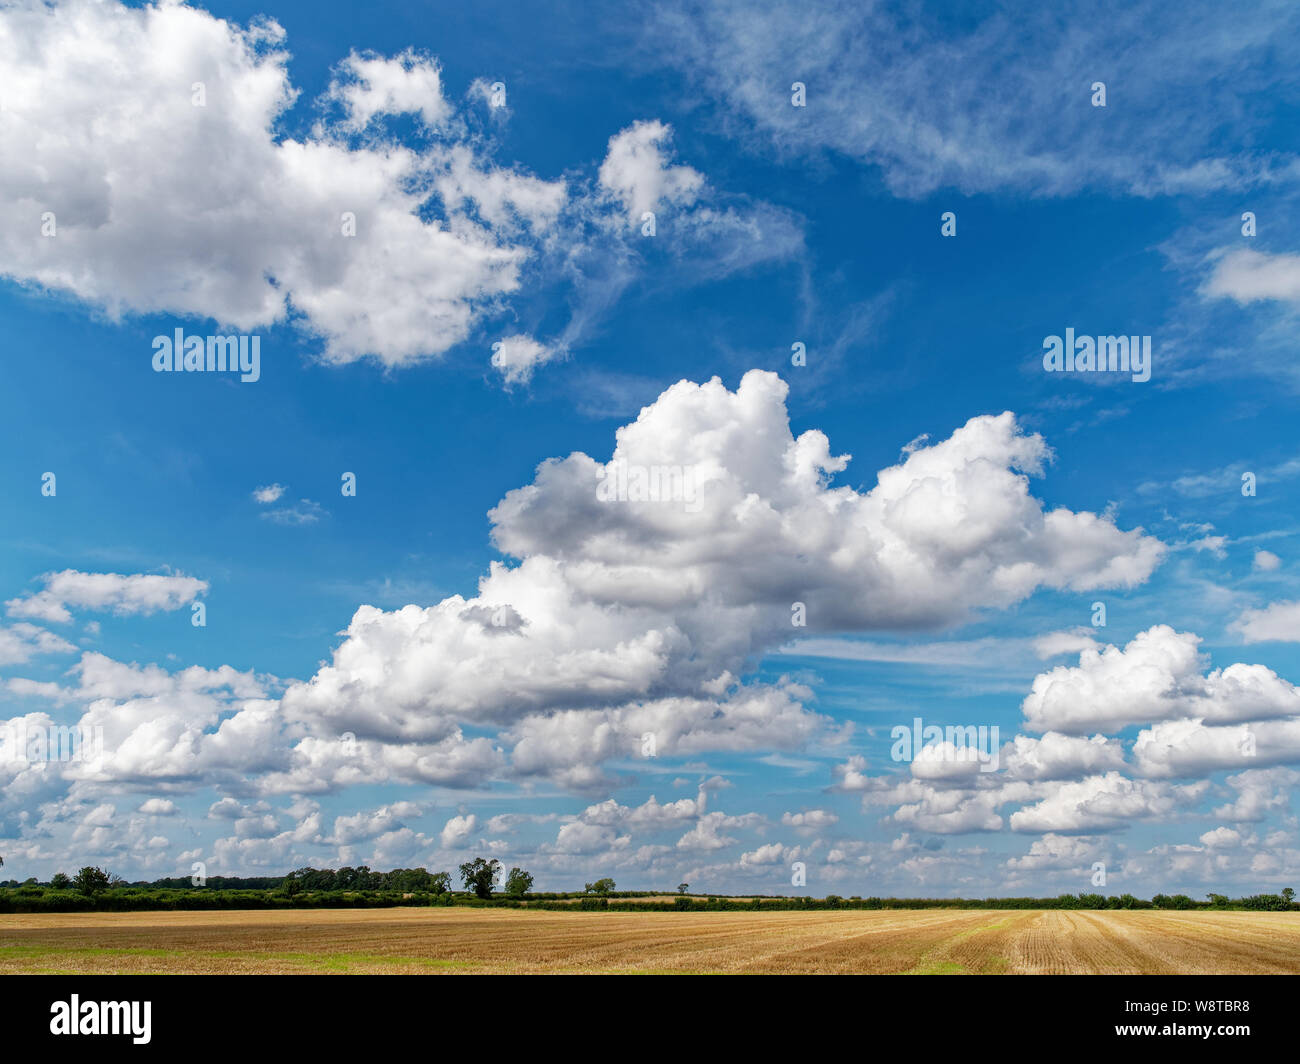 White fluffy Cumulus clouds against a vibrant blue summers sky with a stubble field in the foreground Stock Photo